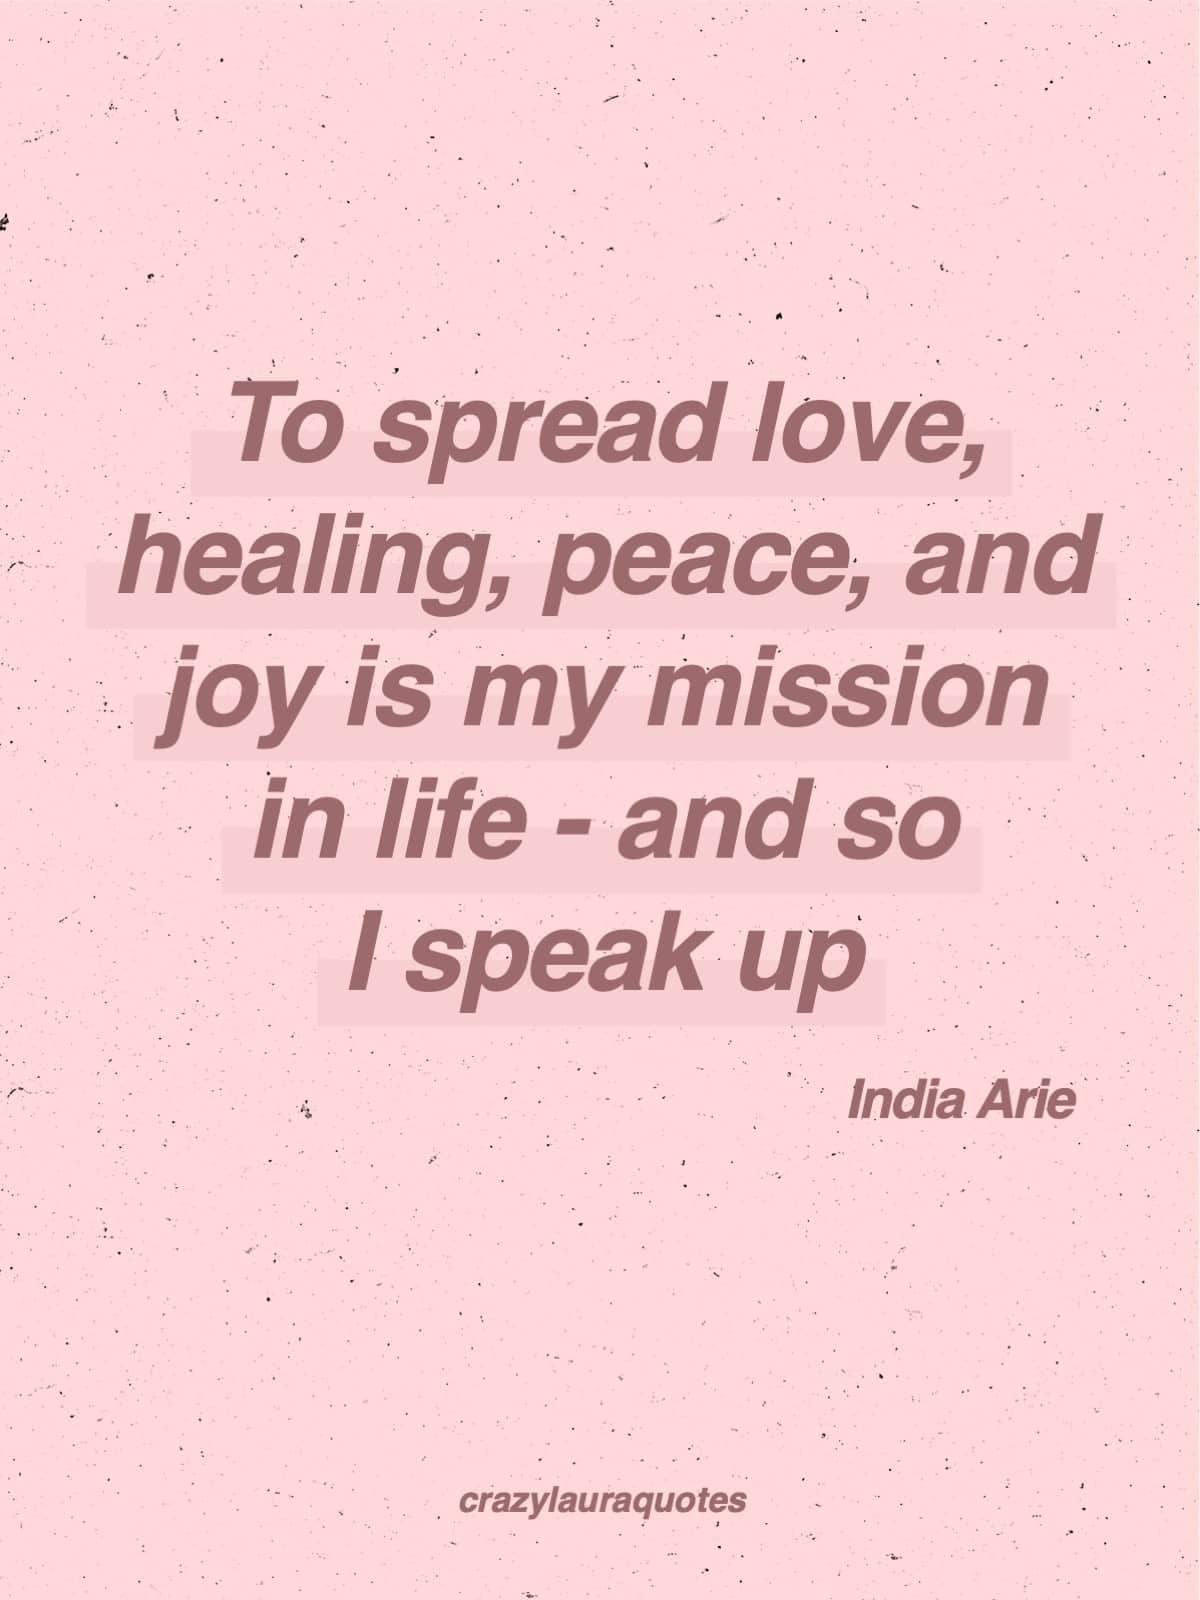 india arie quote about spreading love in life